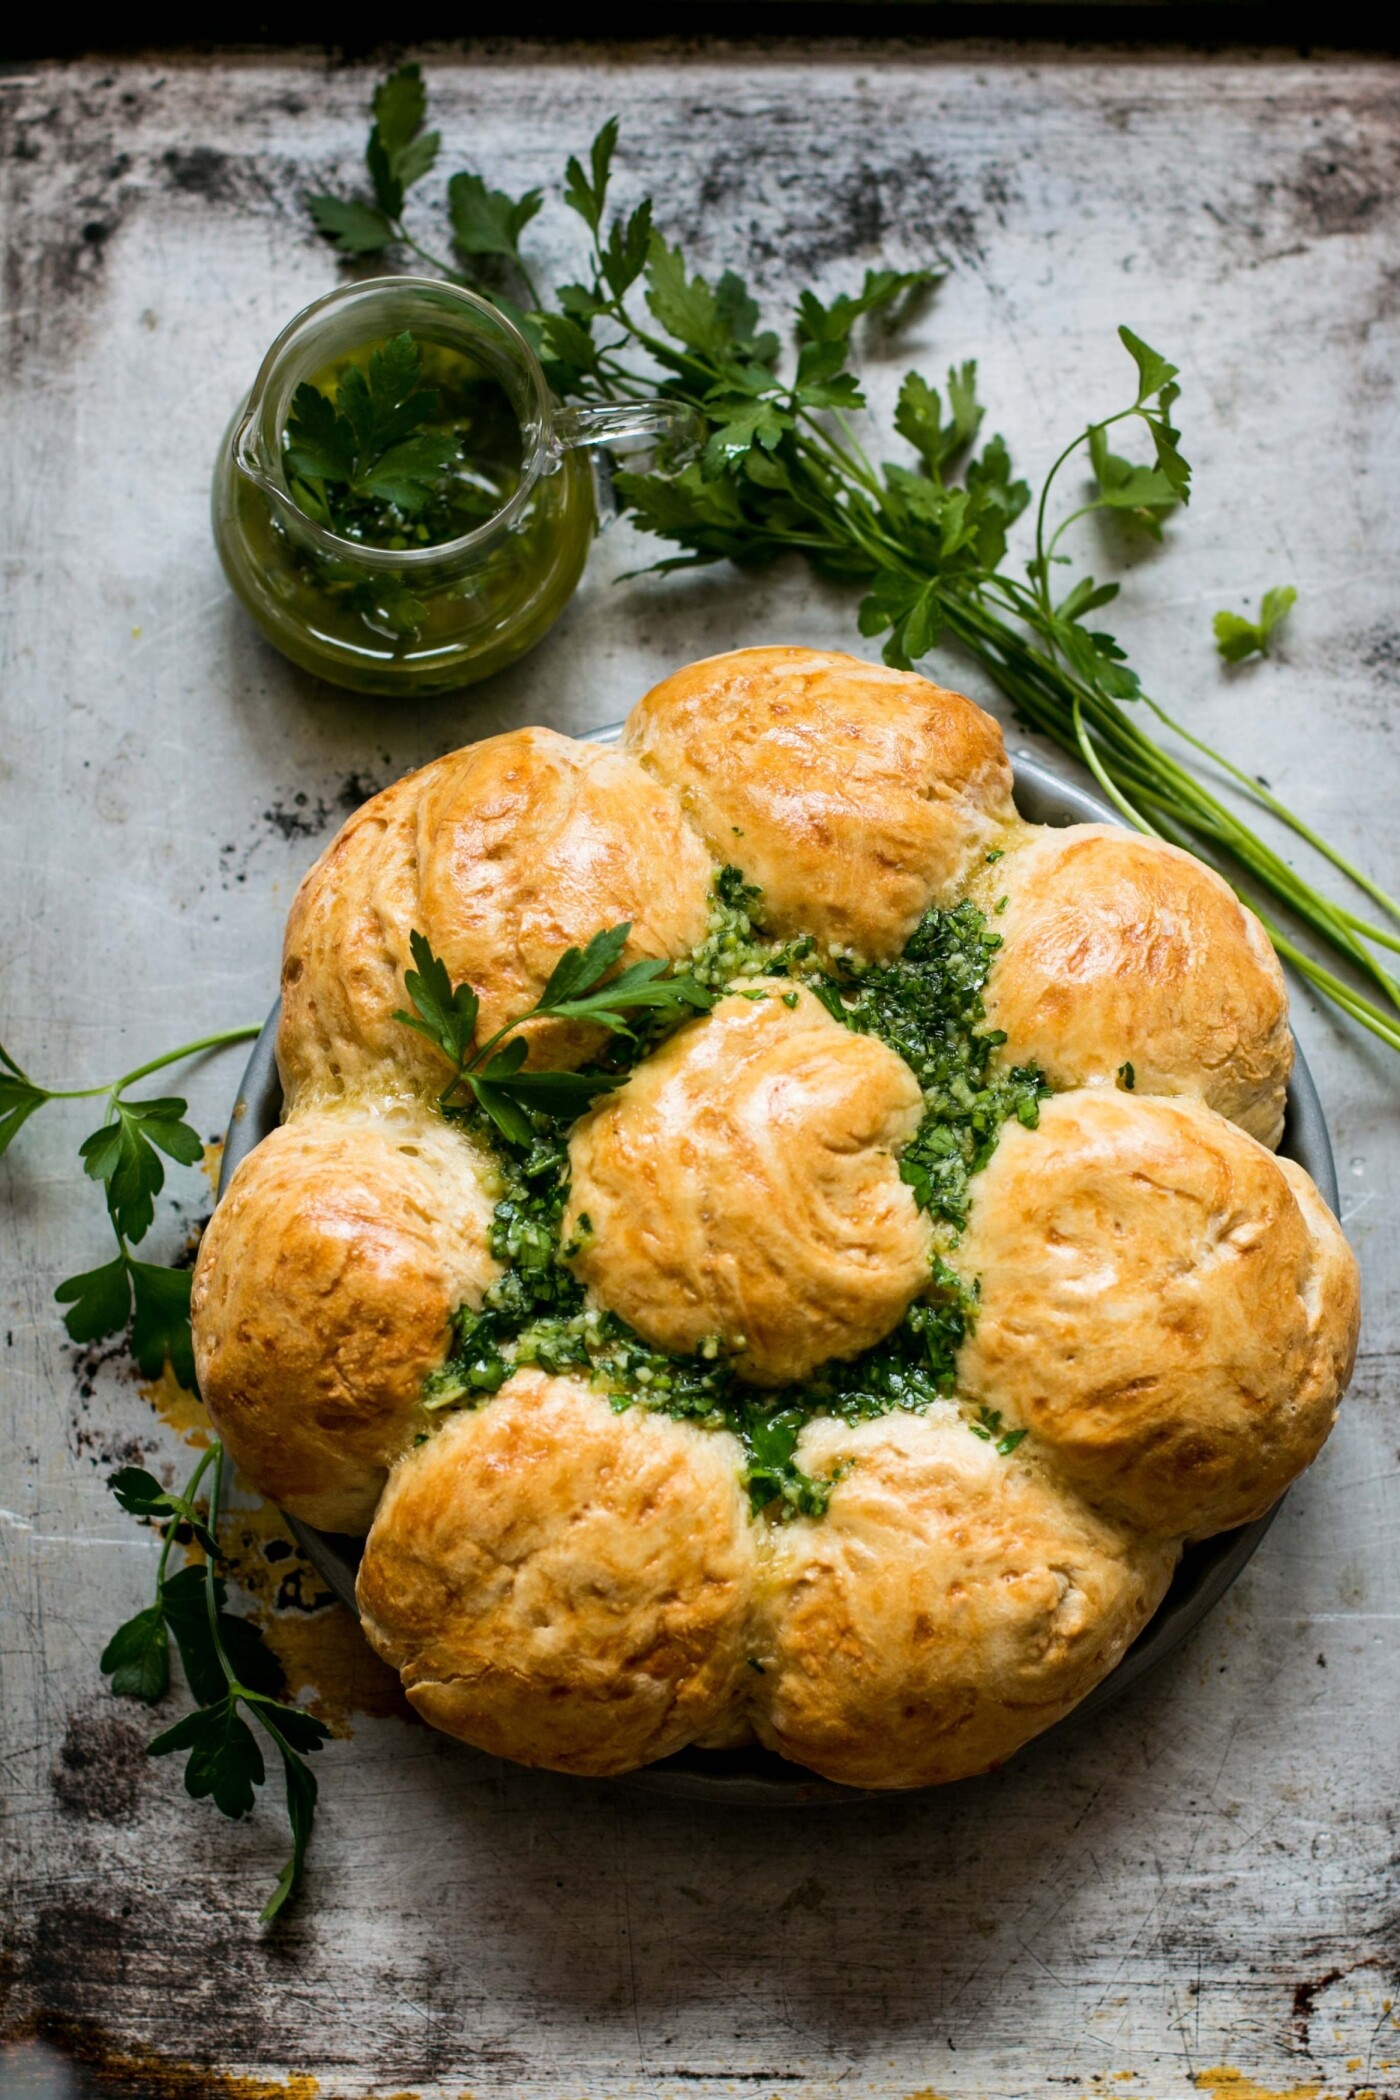 This tear apart garlic and parsley bread was made for my son. He loves to share food with his friends and that way he could invite neighbours for supper. I almost couldn't resist biting into it while taking that picture...the smell was amazing !